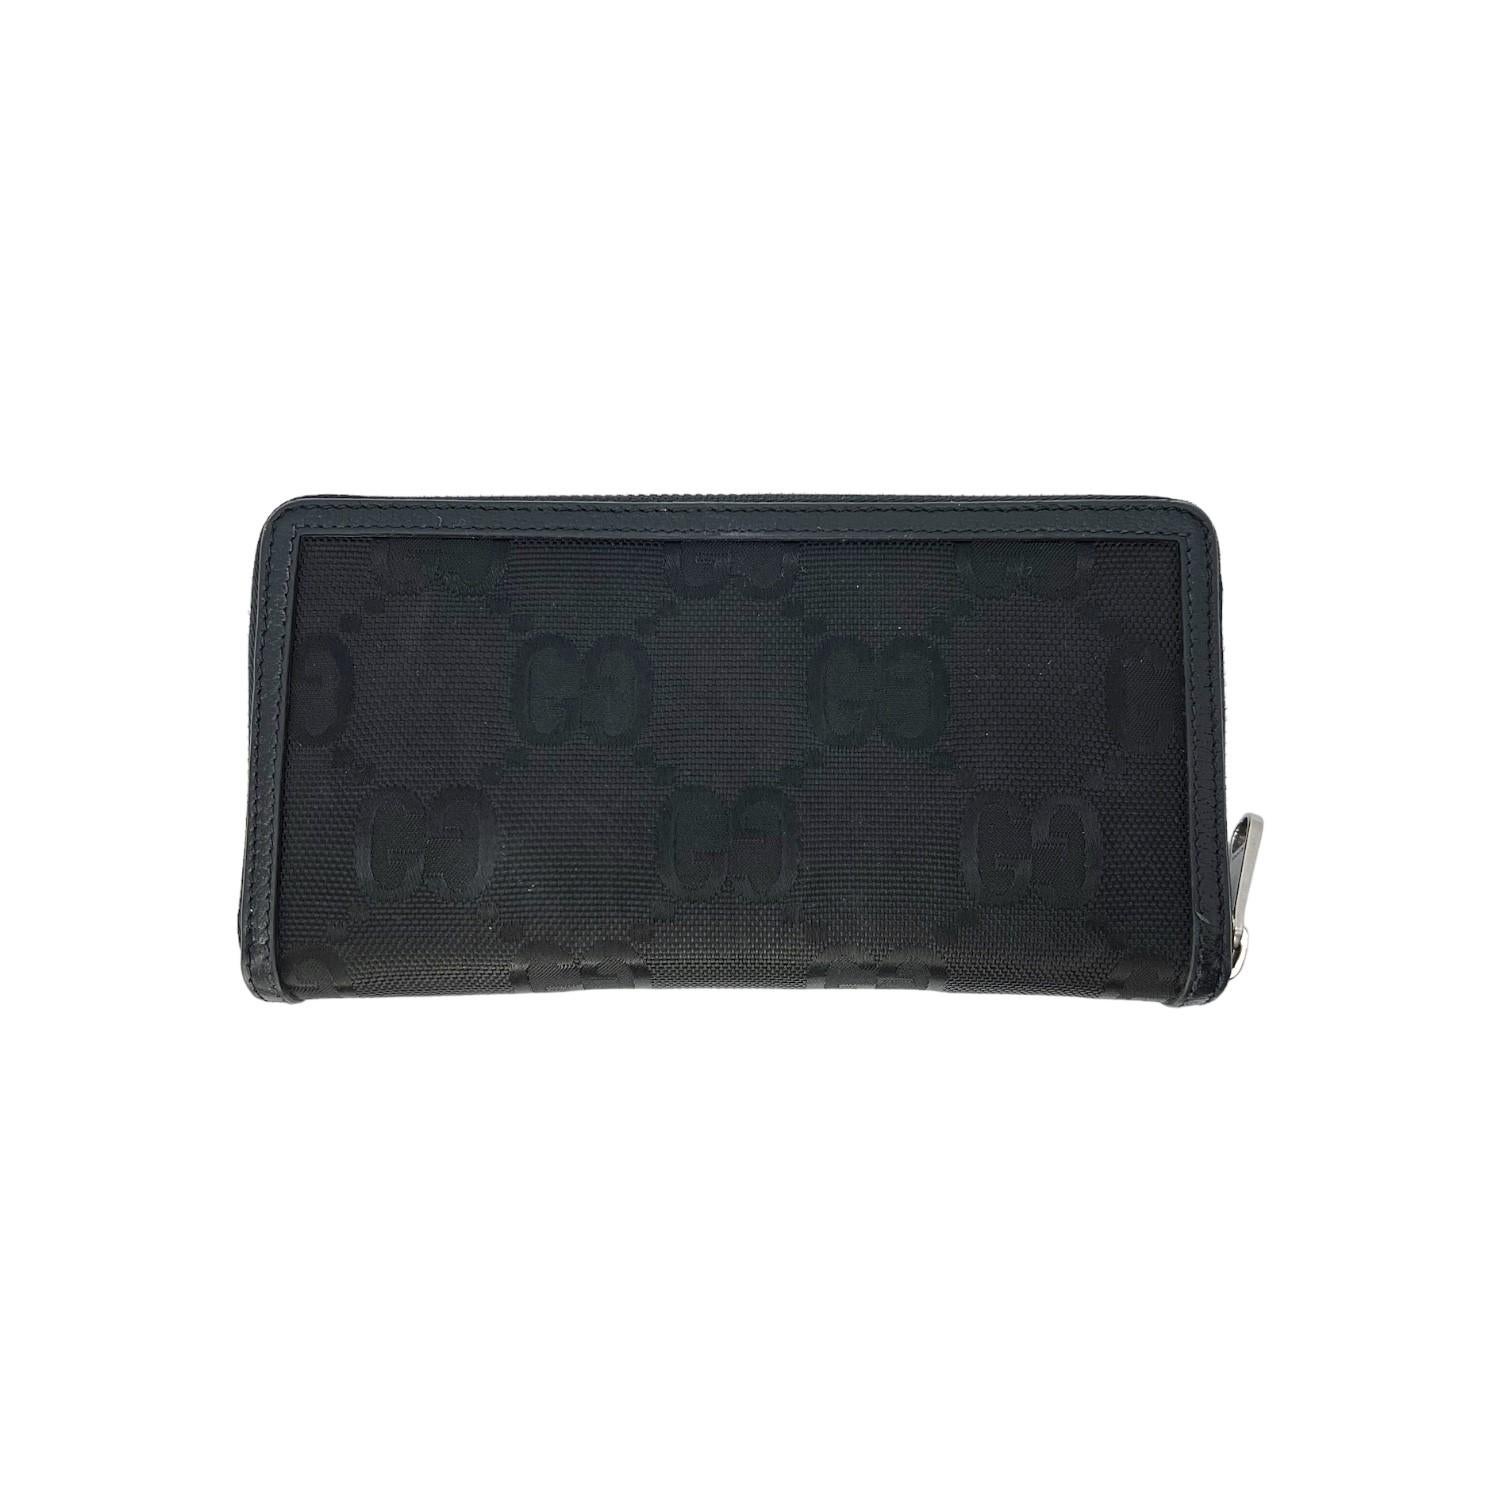 This Gucci Black Off The Grid GG Zip Around Wallet was made in Italy and it is finely crafted of a black recycled nylon exterior with leather trimming and silver-tone hardware features. It has a wrap around zipper closure that opens up to a black